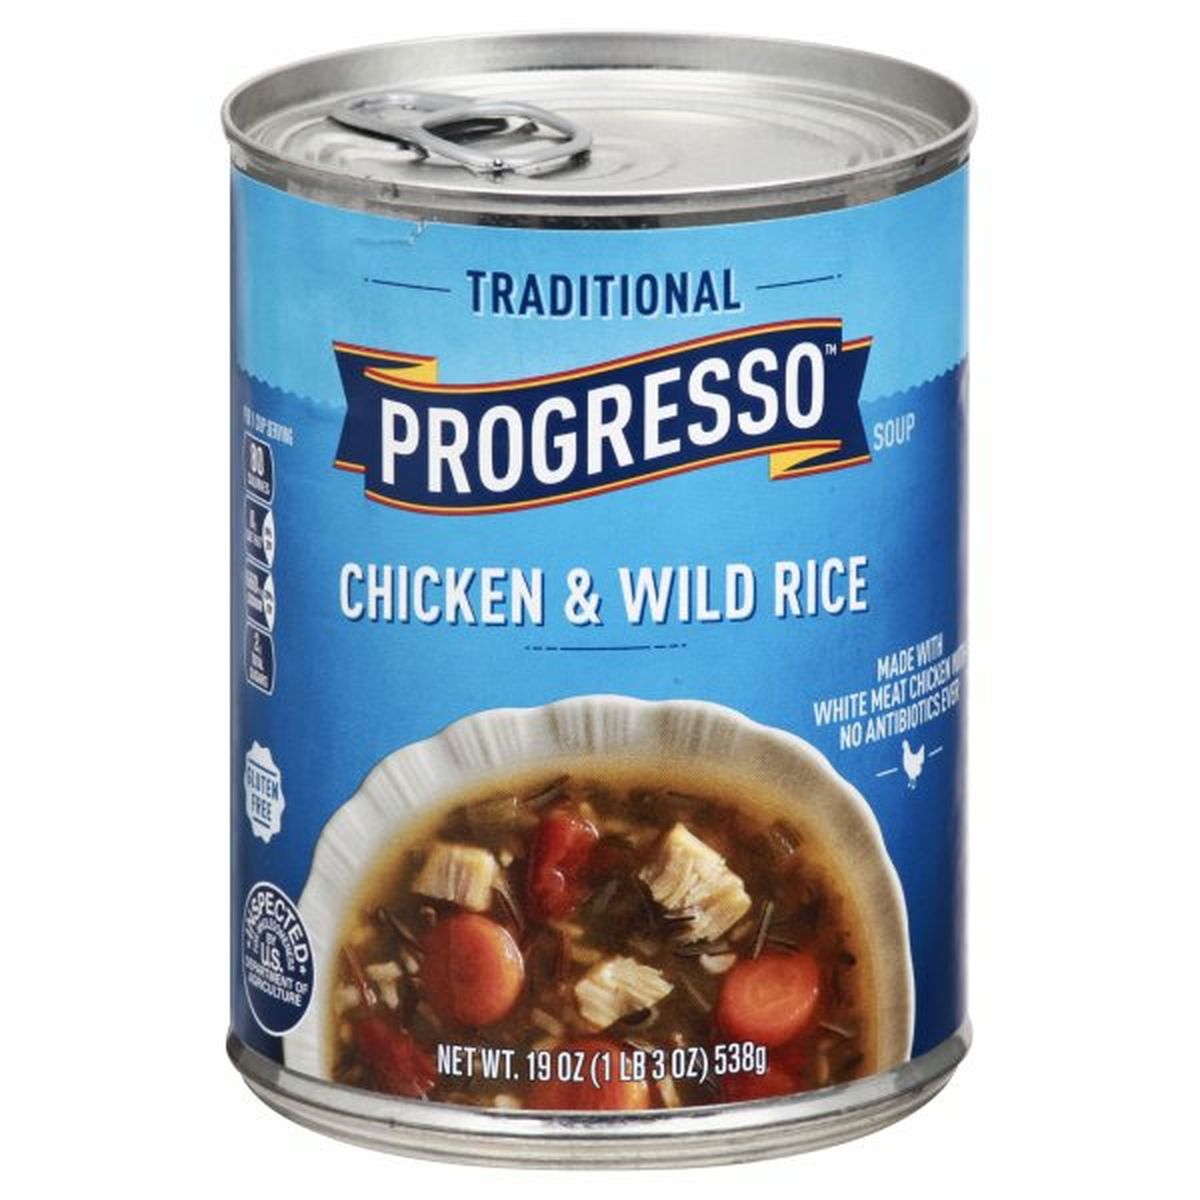 Calories in Progresso Soup, Chicken & Wild Rice, Traditional